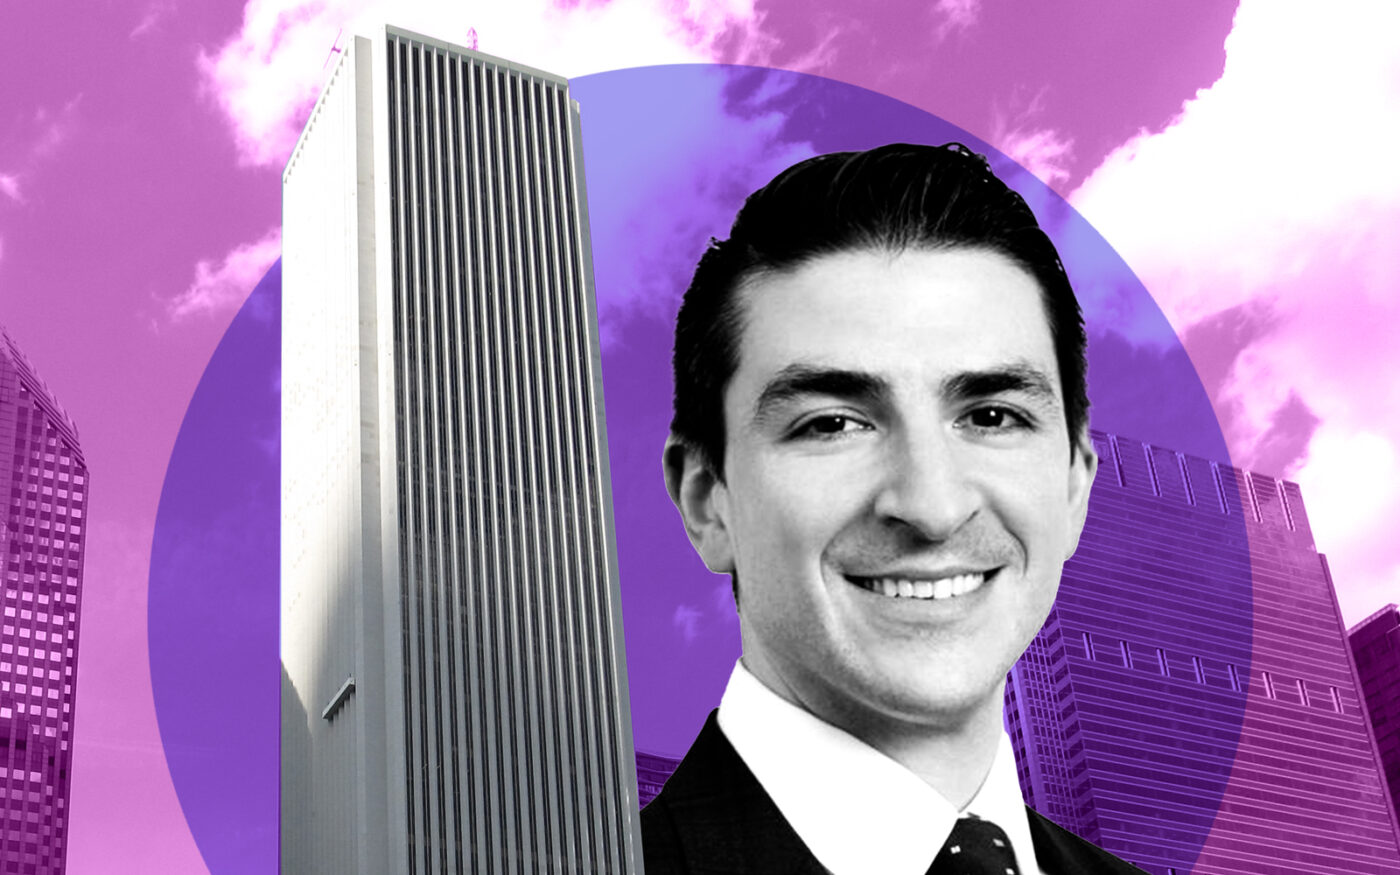 SitusAMC’s Michael Franco with the Aon Center at 200 East Randolph Street